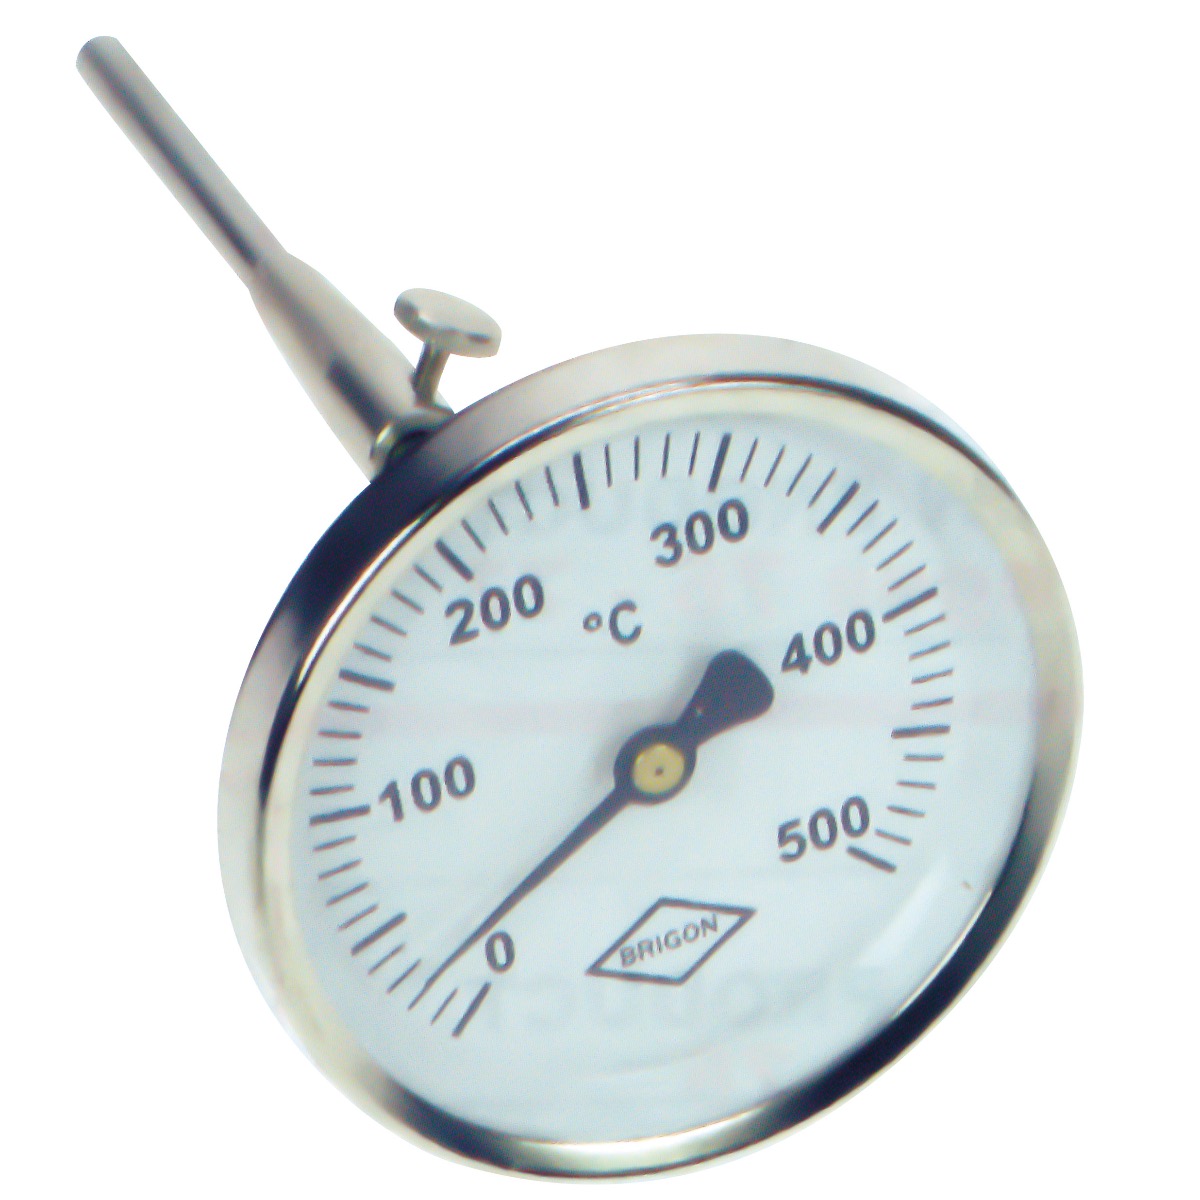 80mm Dial Flue Gas Thermometer - 300mm stem, 0-500°C